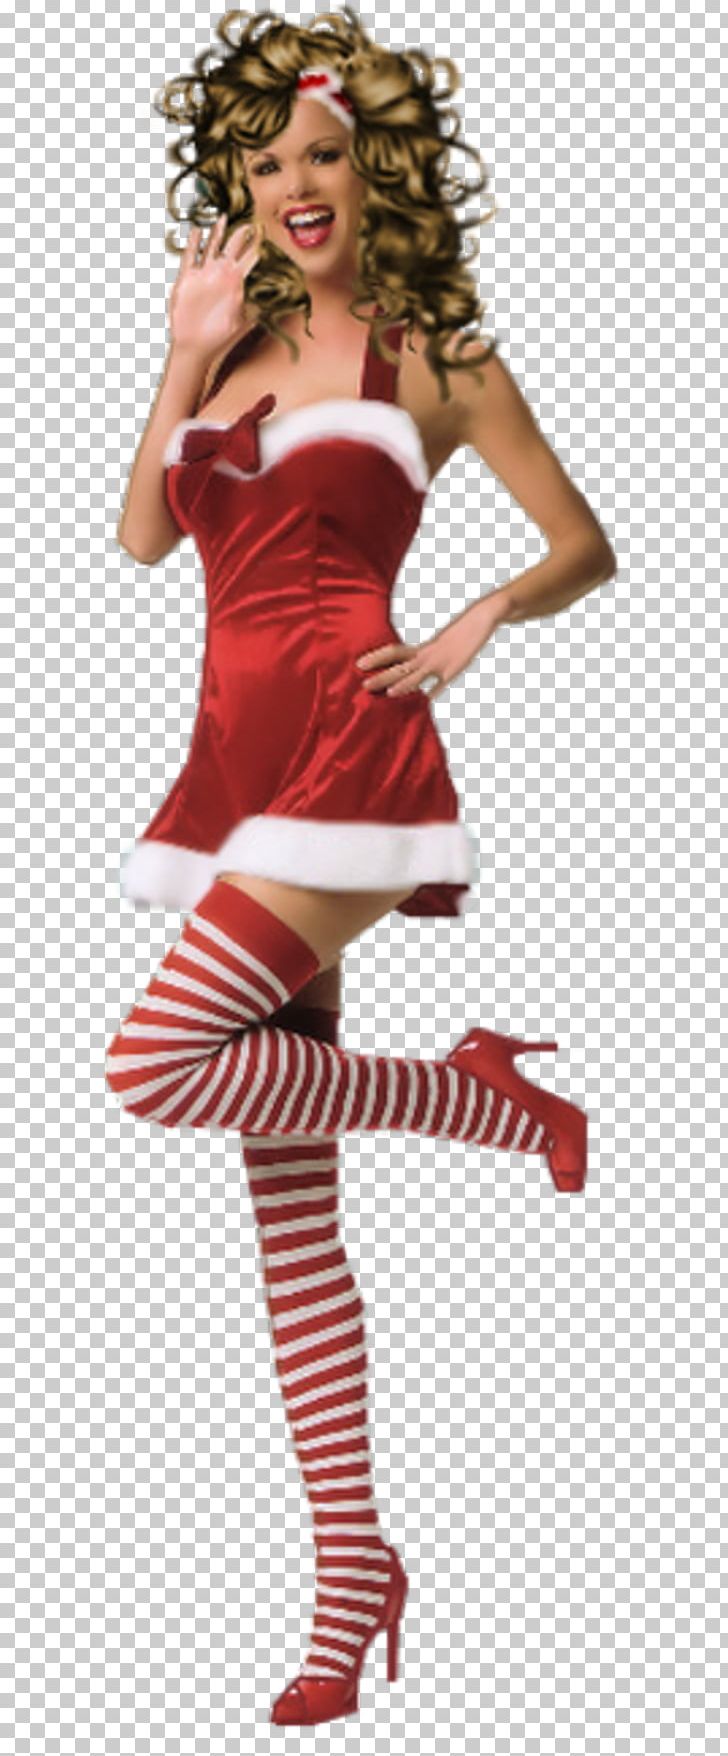 Dress Costume Clothing Sizes Santa Claus PNG, Clipart, Chant, Christmas, Christmas Ornament, Clothing, Clothing Sizes Free PNG Download